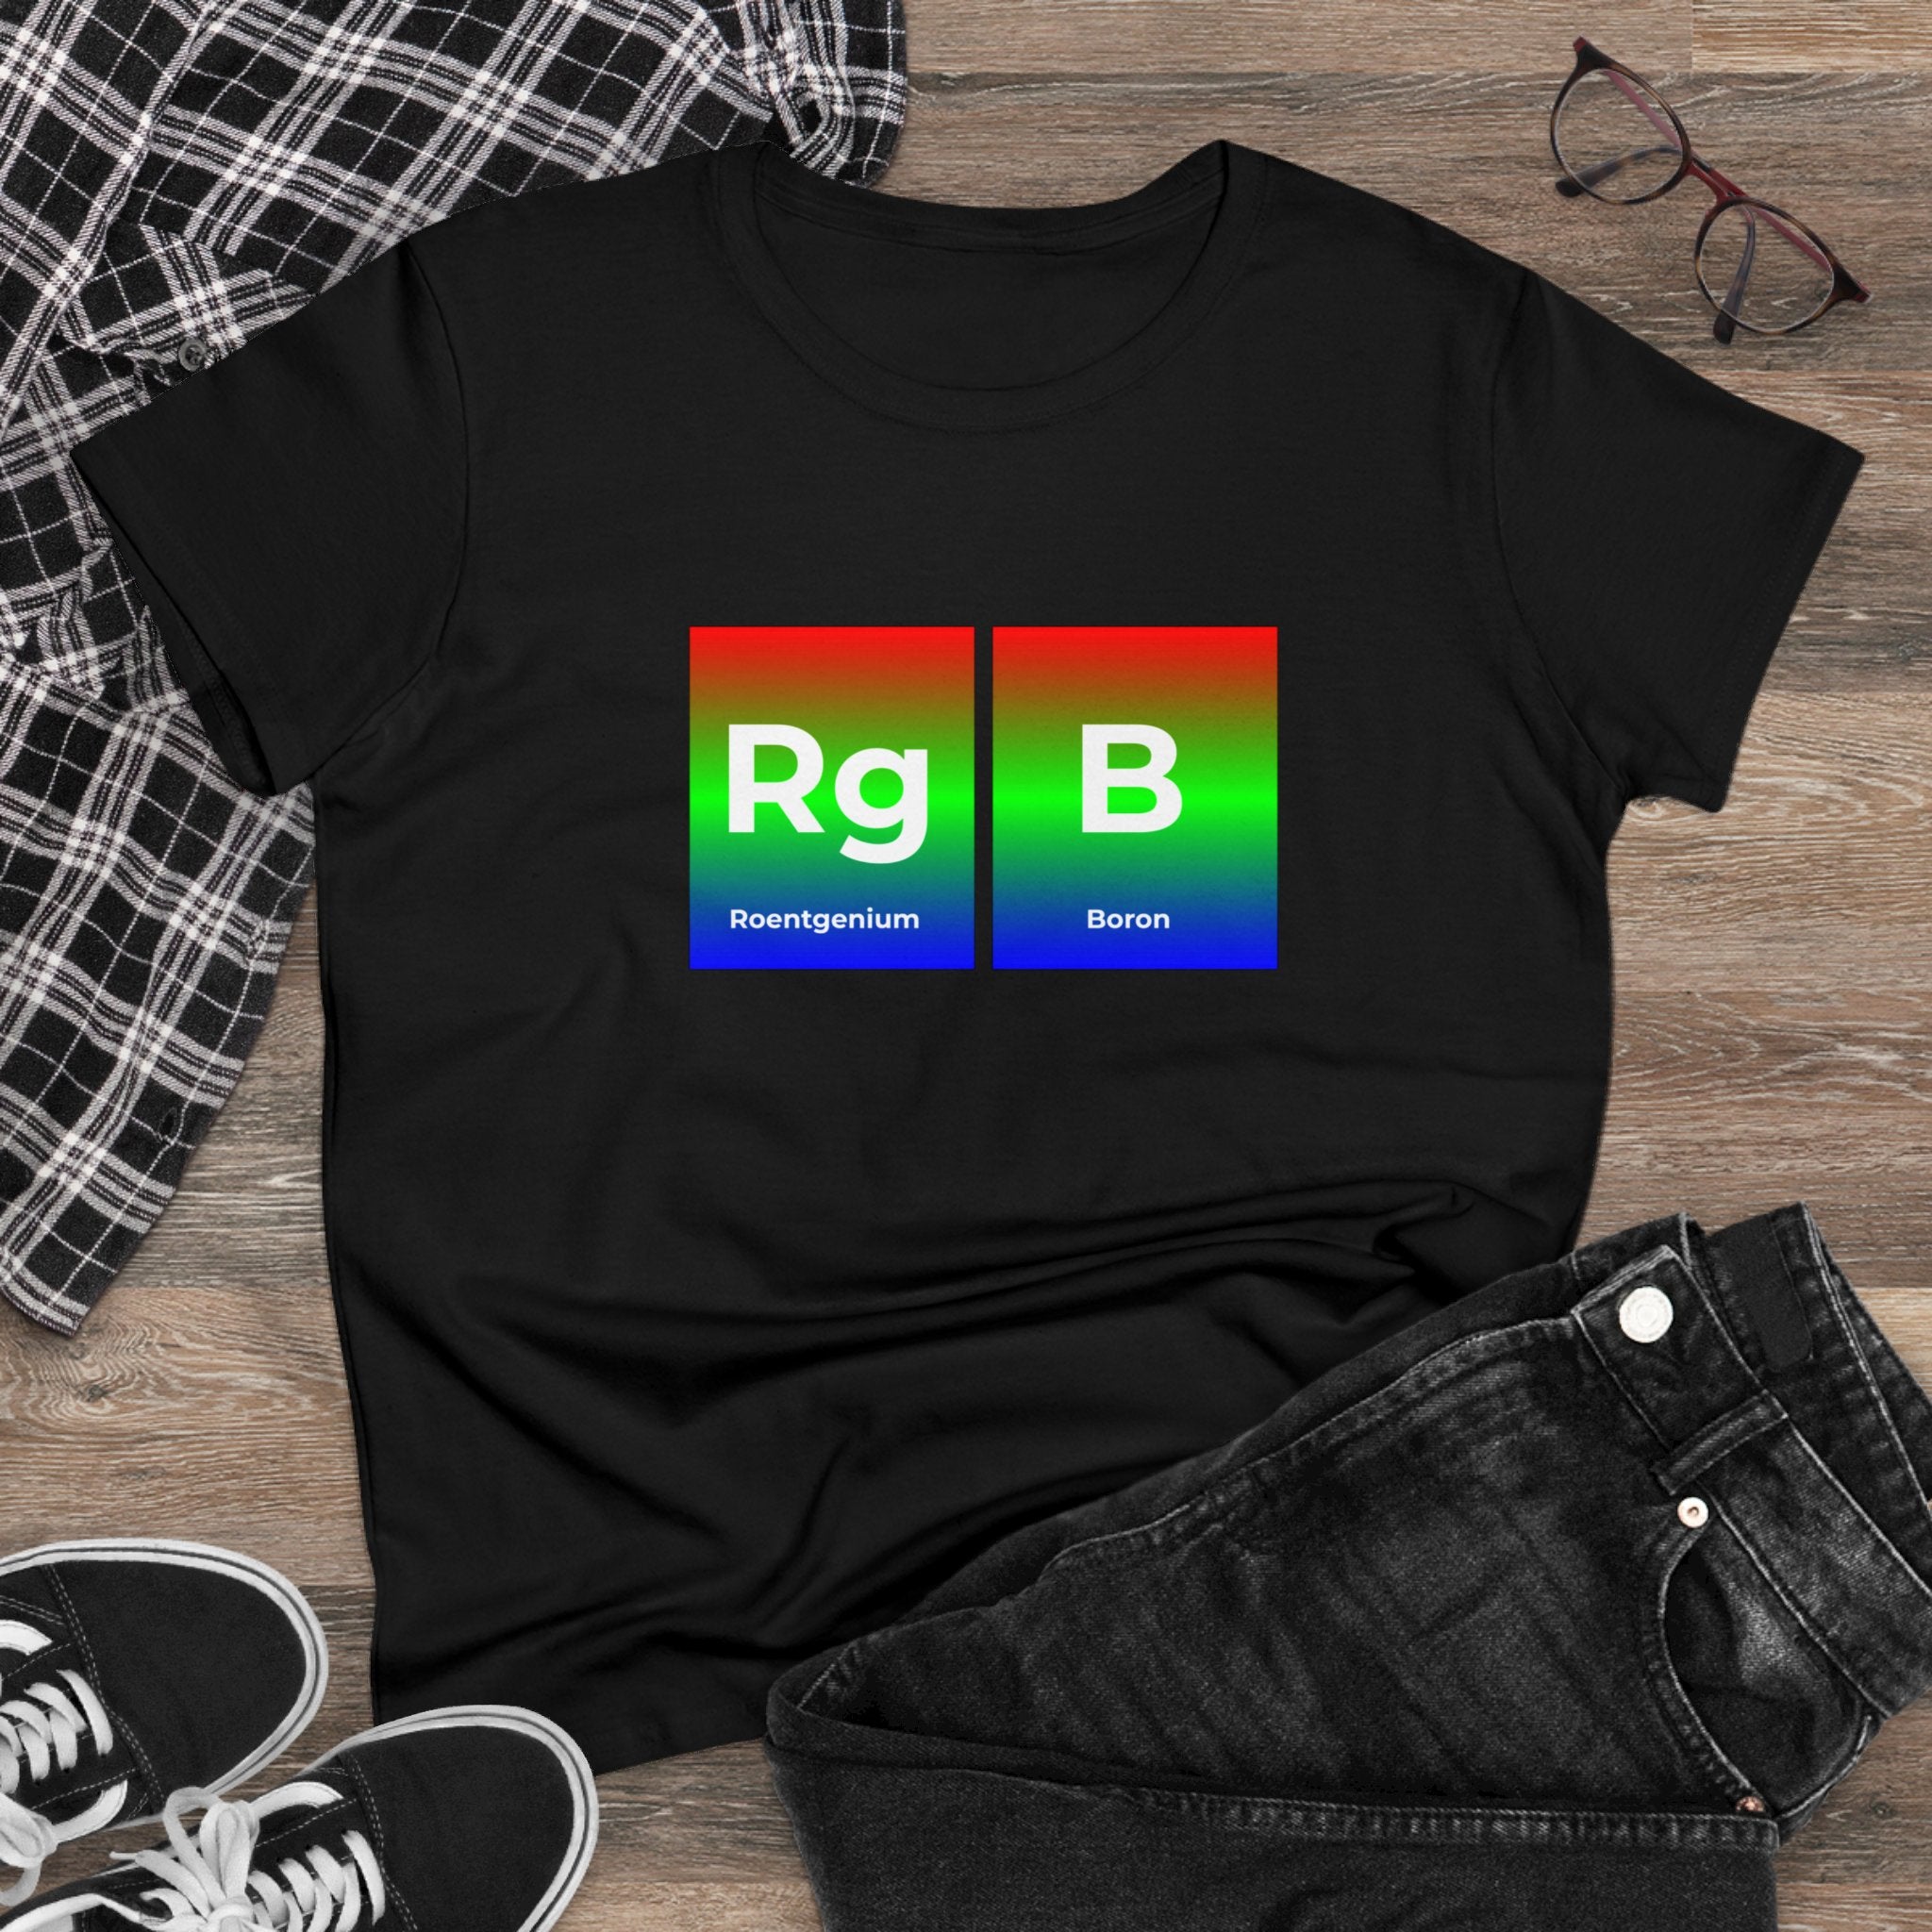 RG-B - Women's Tee on wooden floor with RGB-themed periodic table elements "Rg" for Roentgenium and "B" for Boron. Surrounded by black-and-white checkered fabric, black jeans, glasses, and black sneakers, this cotton RG-B piece epitomizes ethical fashion.